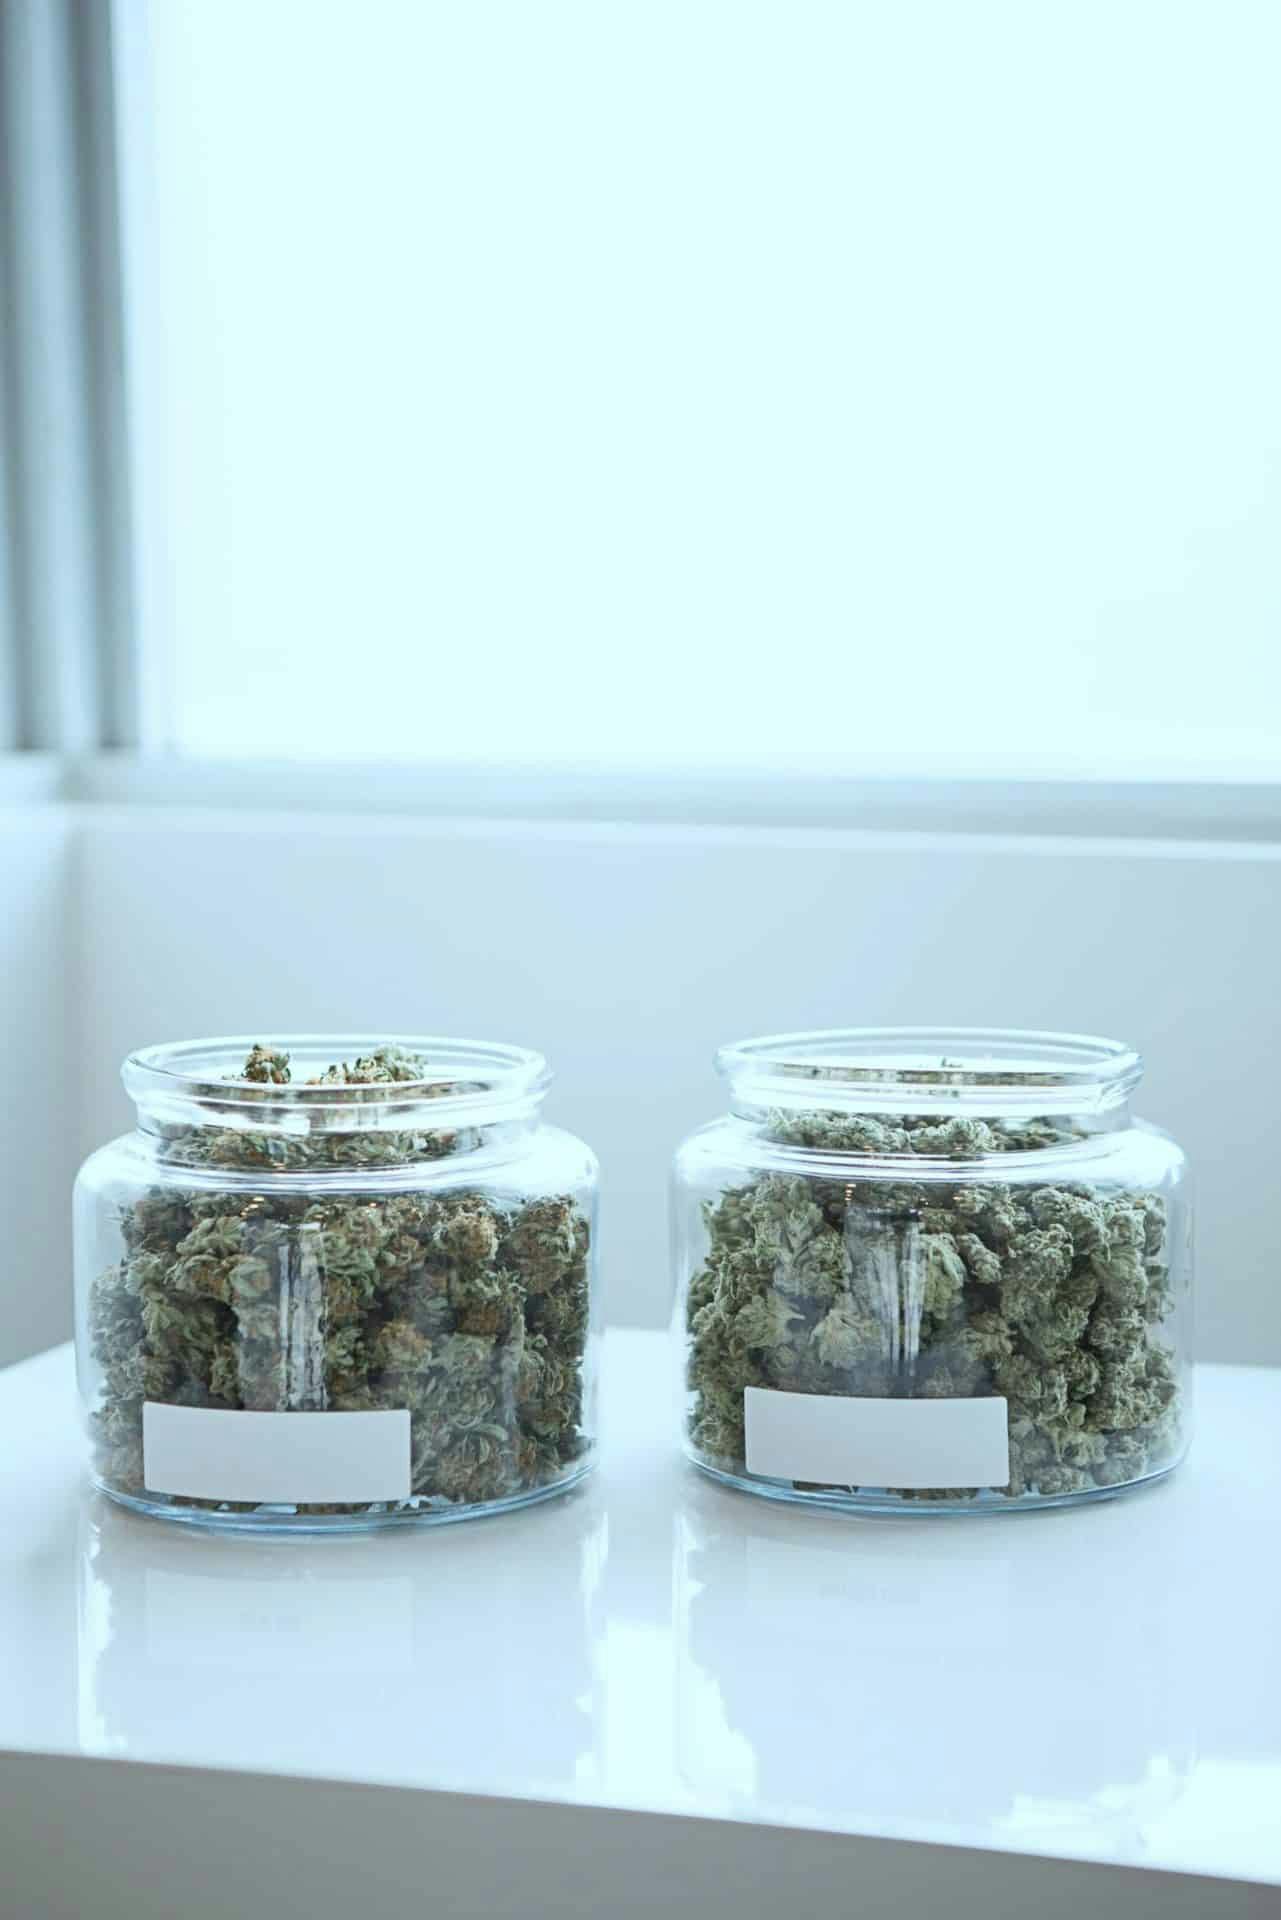 Photo of two clear jar containers filled with weed